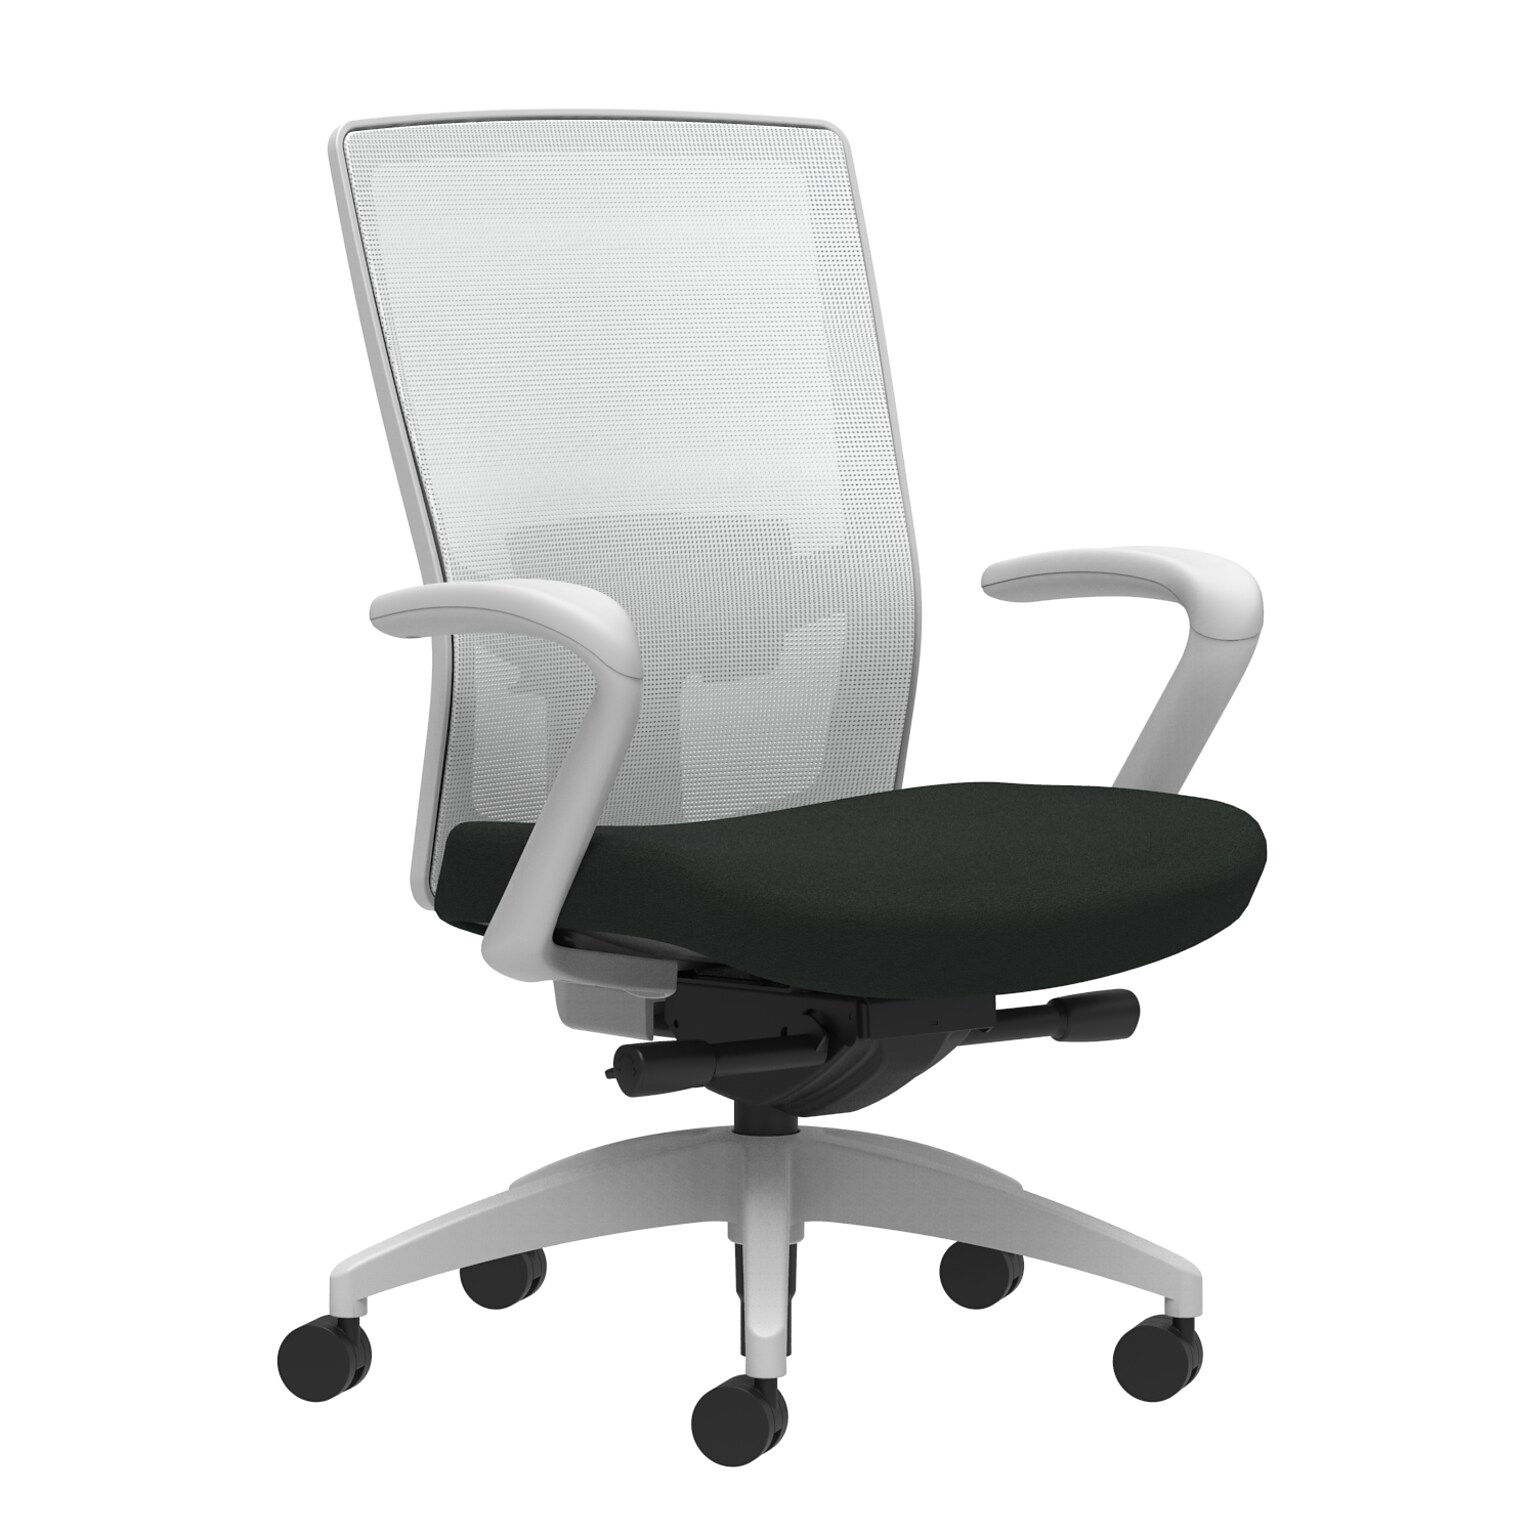 Union & Scale Workplace2.0™ Task Chair, Black Vinyl, Adjustable Lumbar, Fixed Arms, Advanced Synchro-Tilt Seat Control (53593)